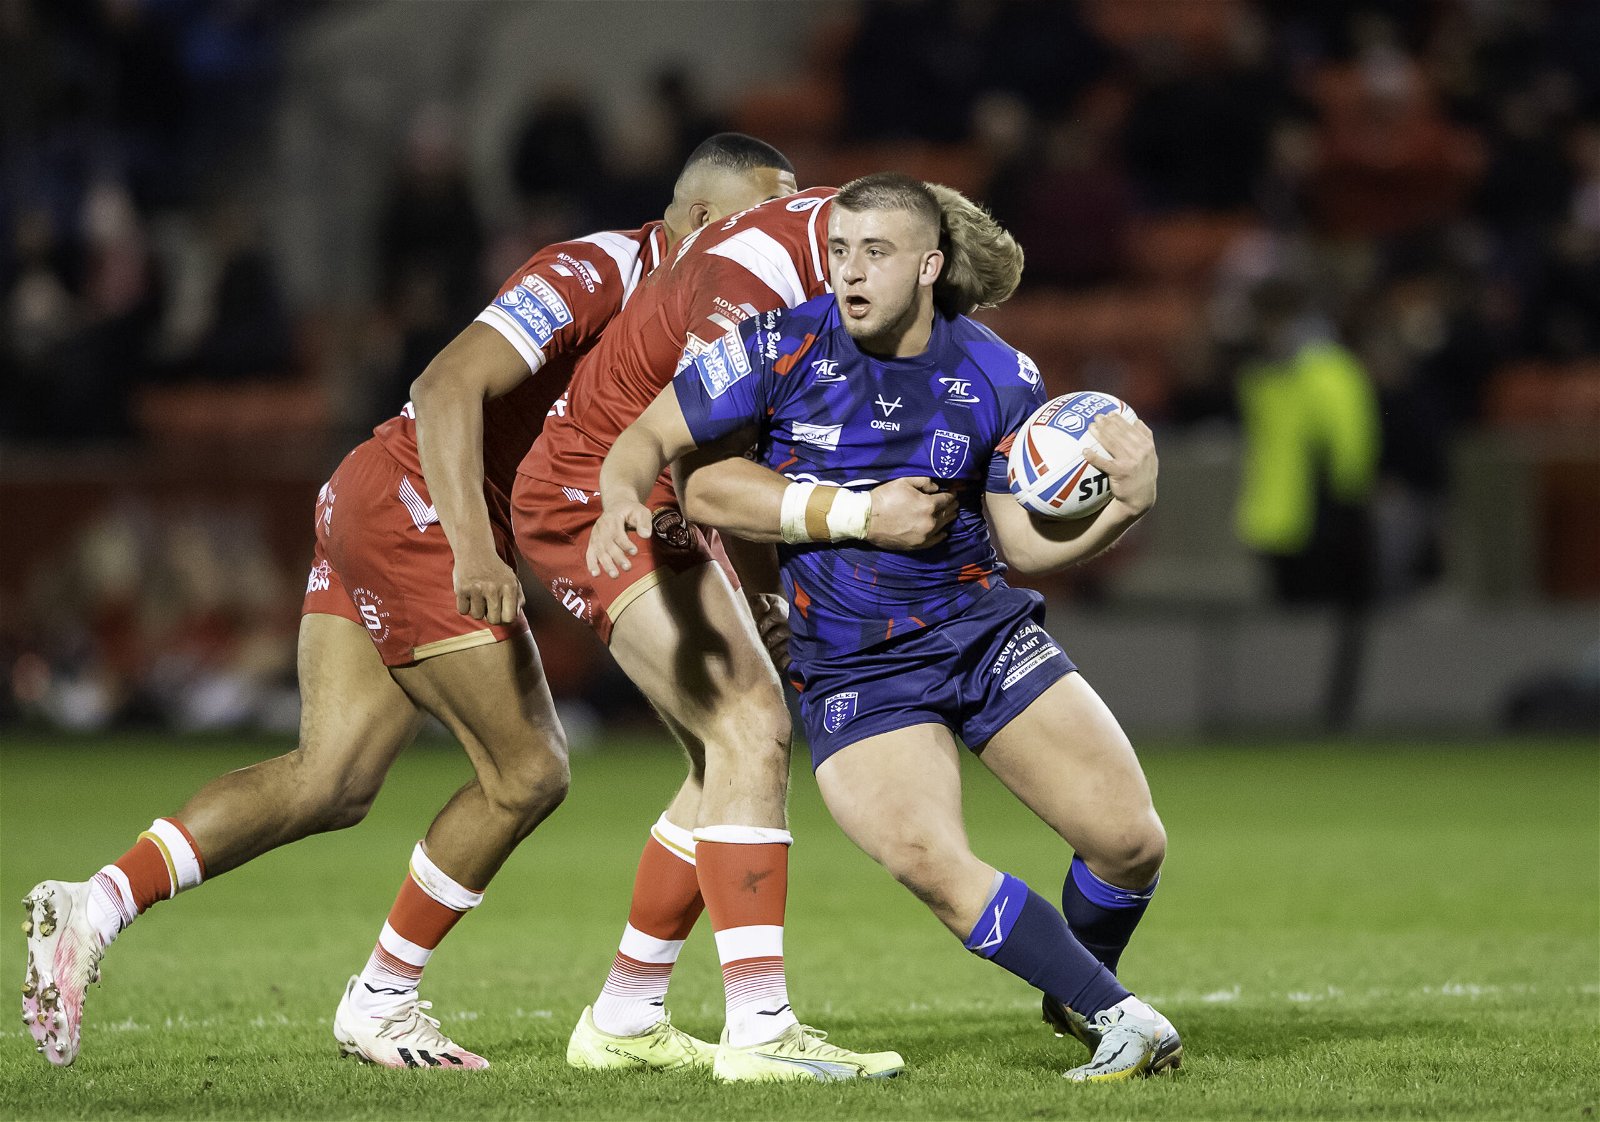 Salford Red Devils injury news: Brodie Croft absence explained as